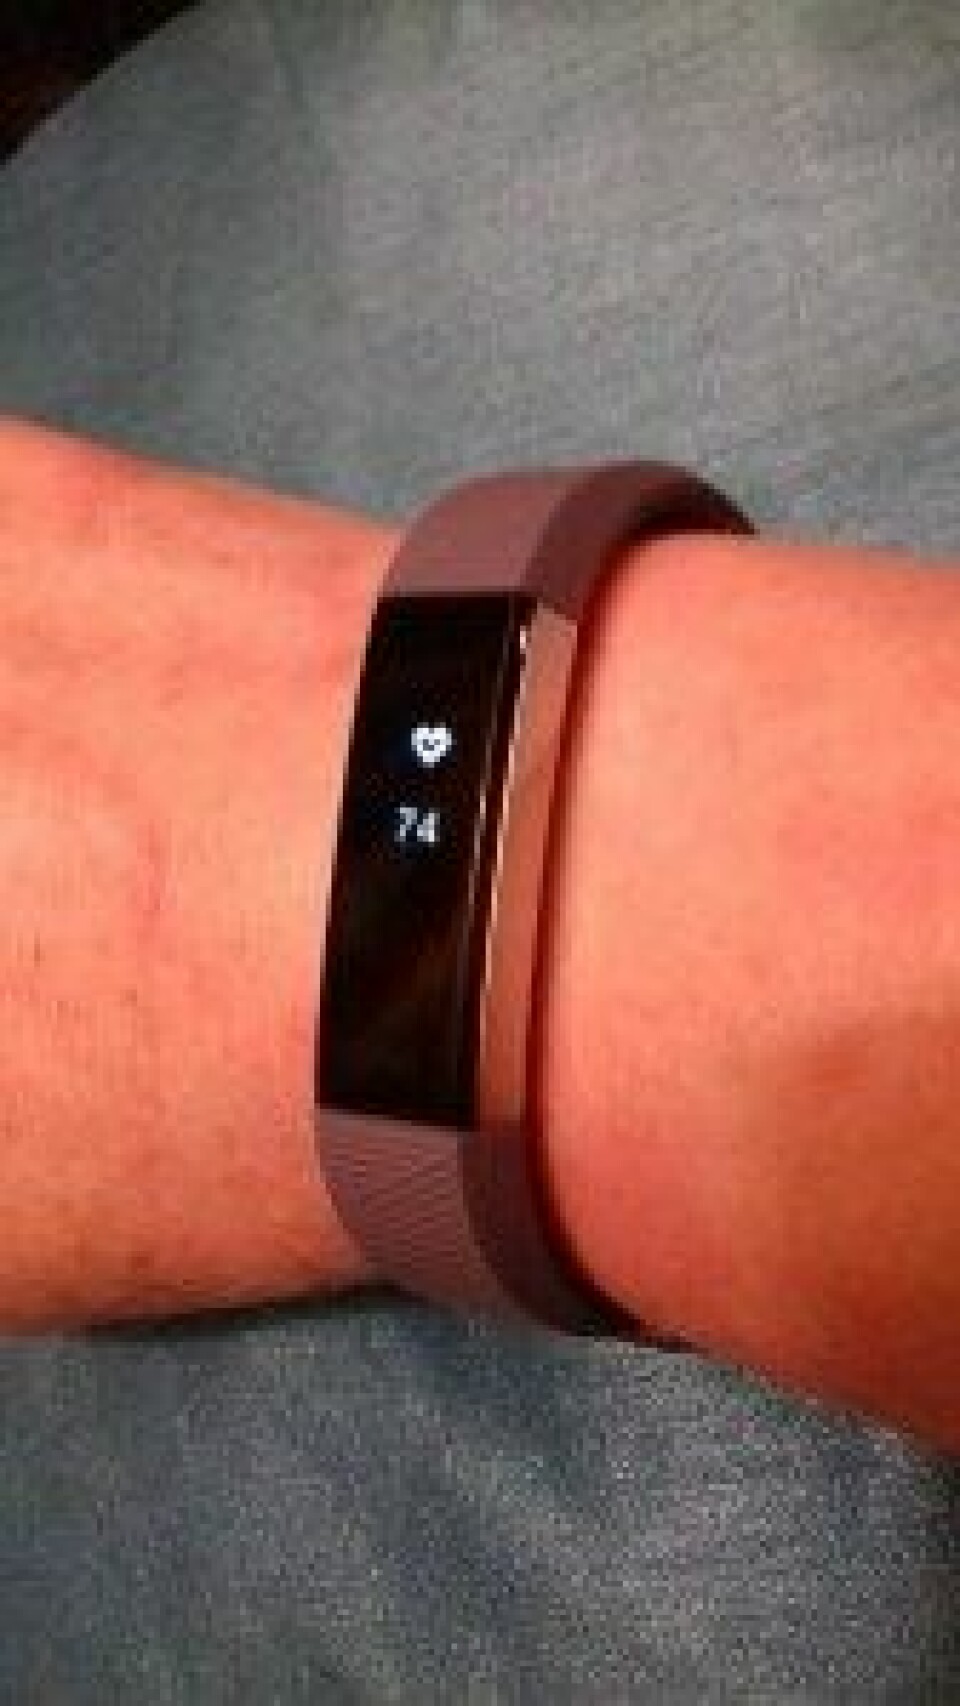 FitBit (fra Wikimedia Commons)